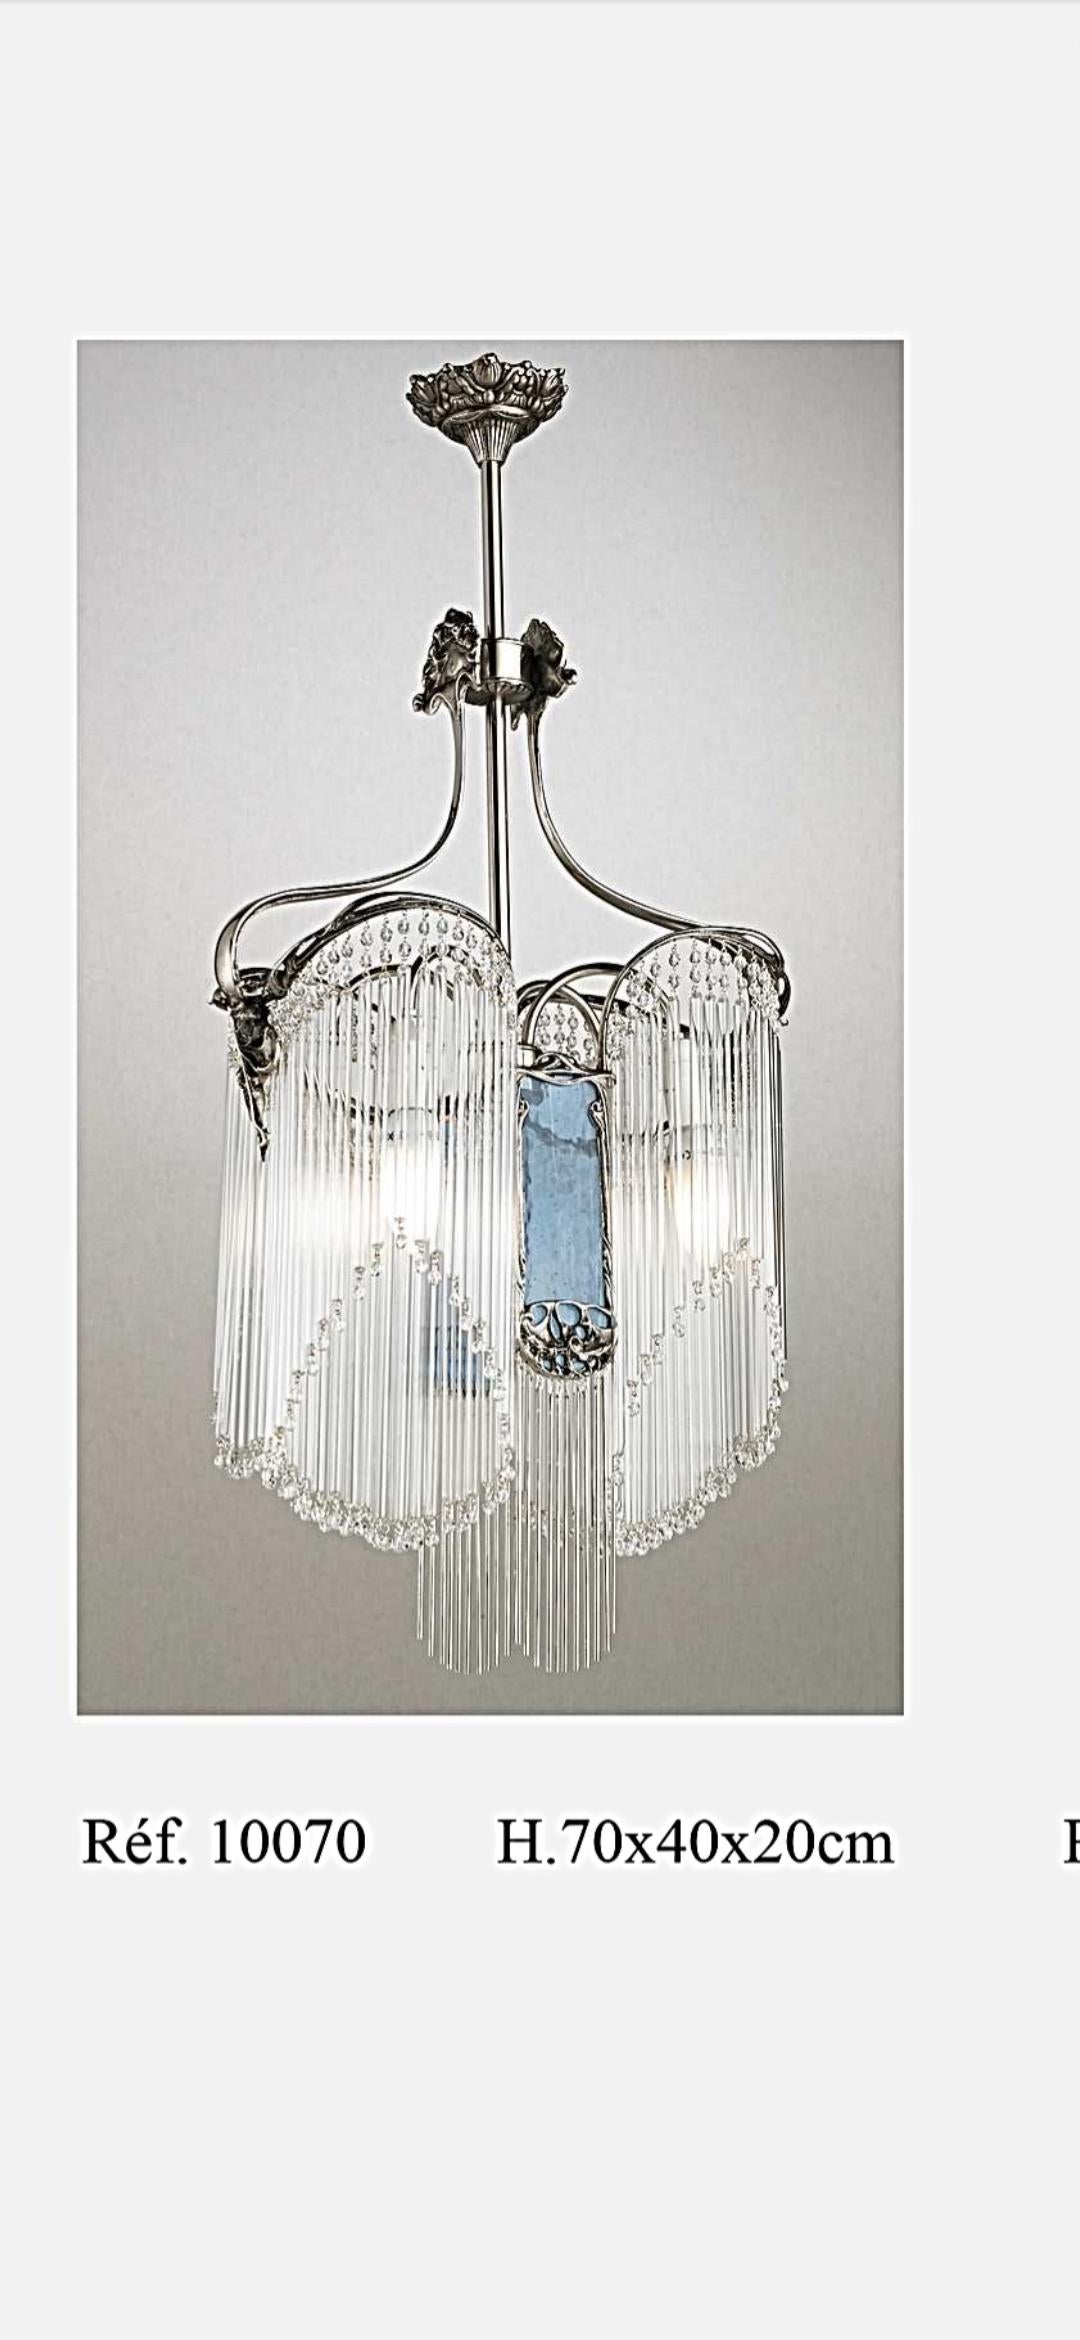 Art Nouveau Guimard Chandelier with Gold Finish

Heigh : 65cm